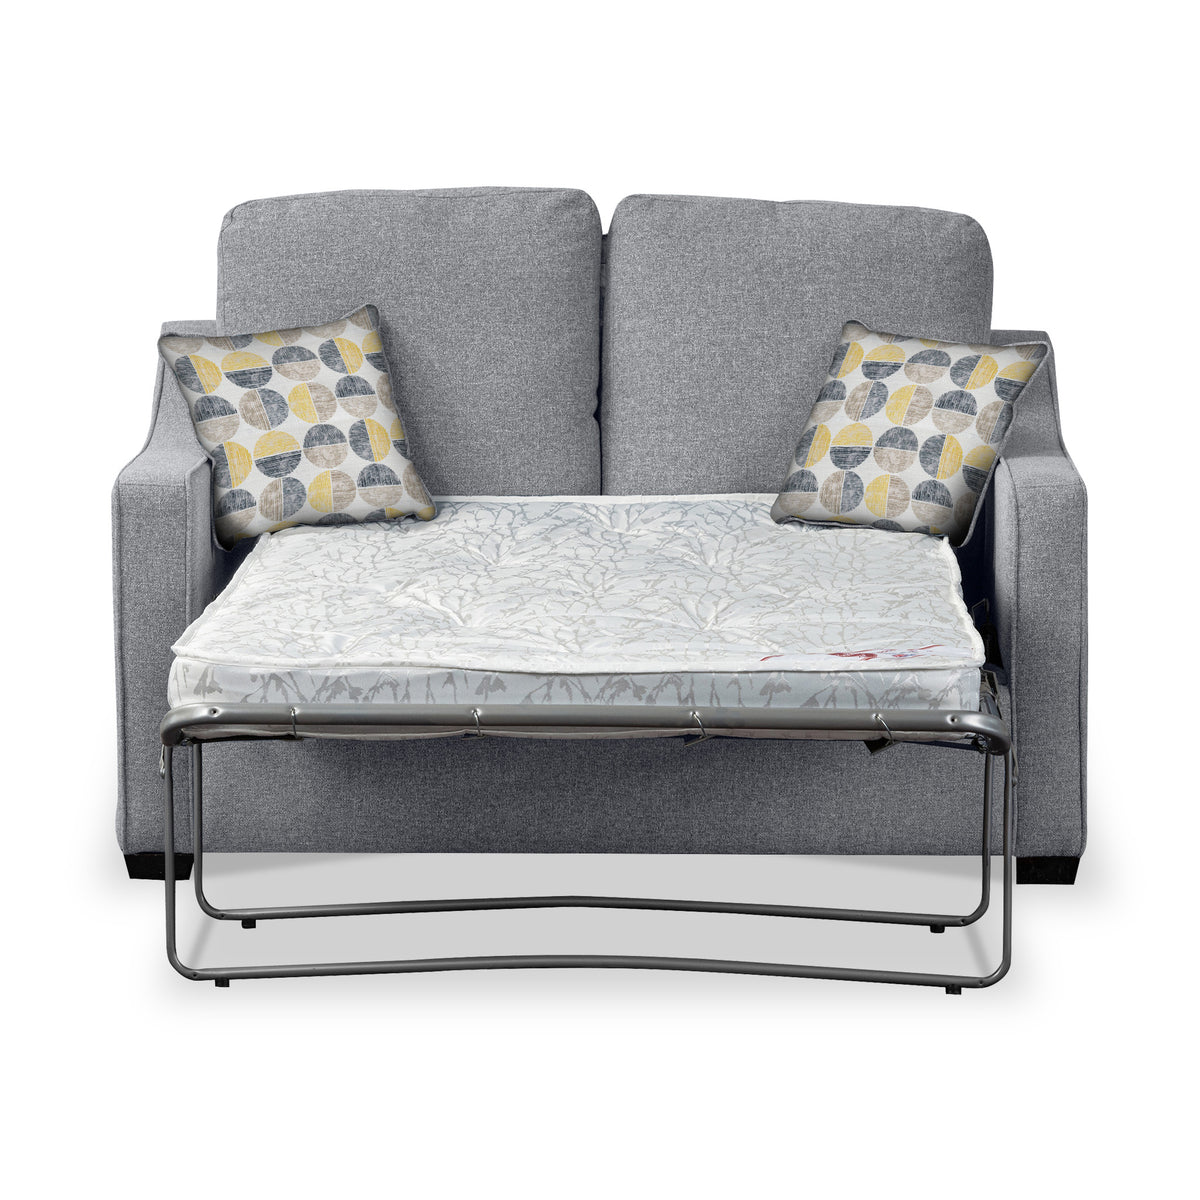 Charlcote Silver Faux Linen 2 Seater Sofabed with Beige Scatter Cushions from Roseland Furniture